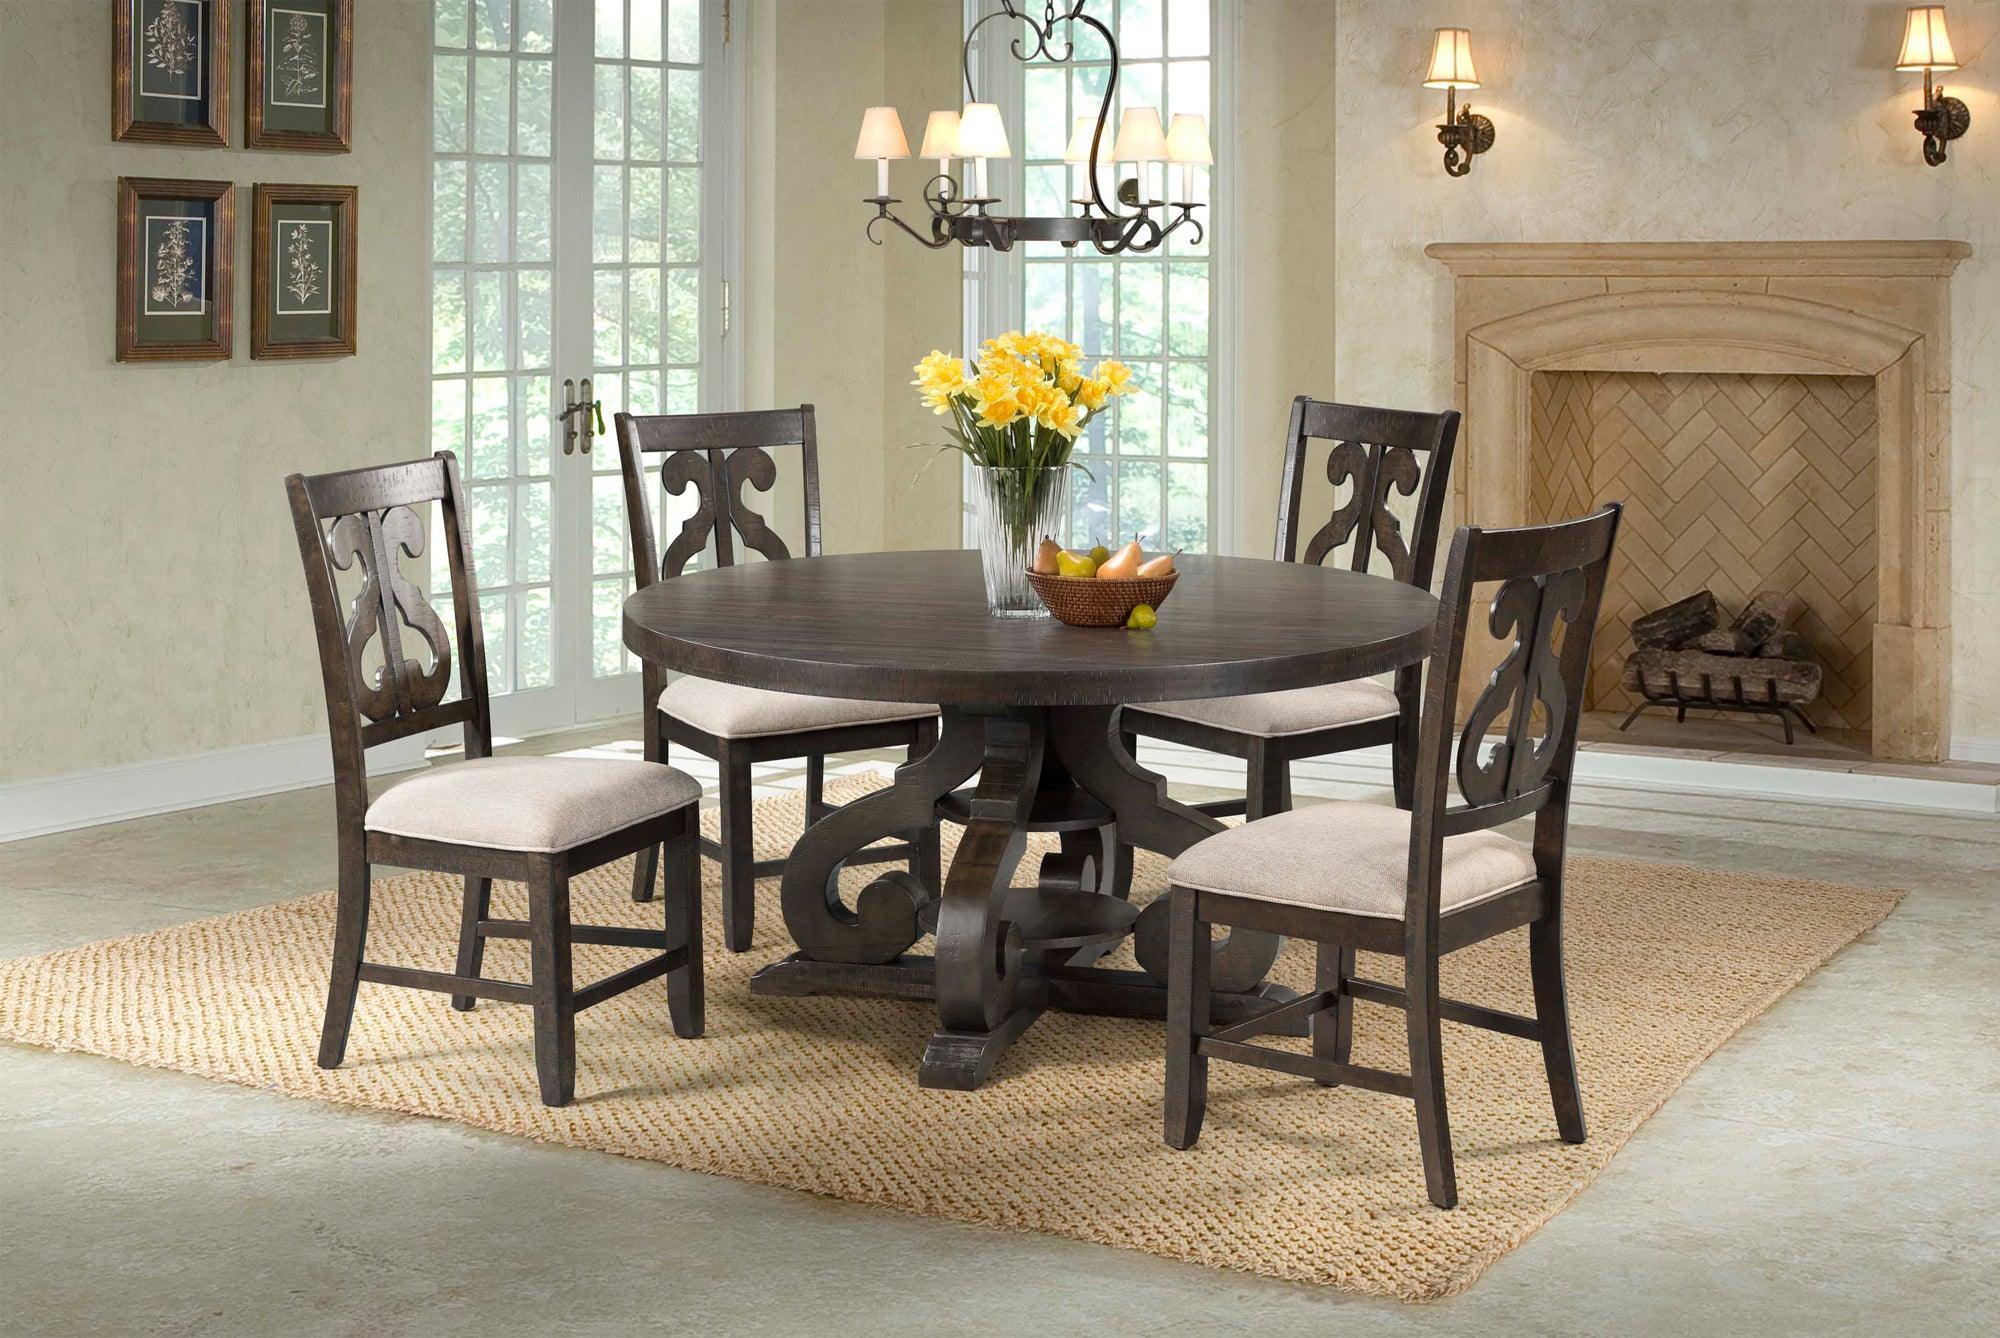 Elements Dining Sets - Stanford Round 5PC Dining Set-Round Table & 4 Chairs